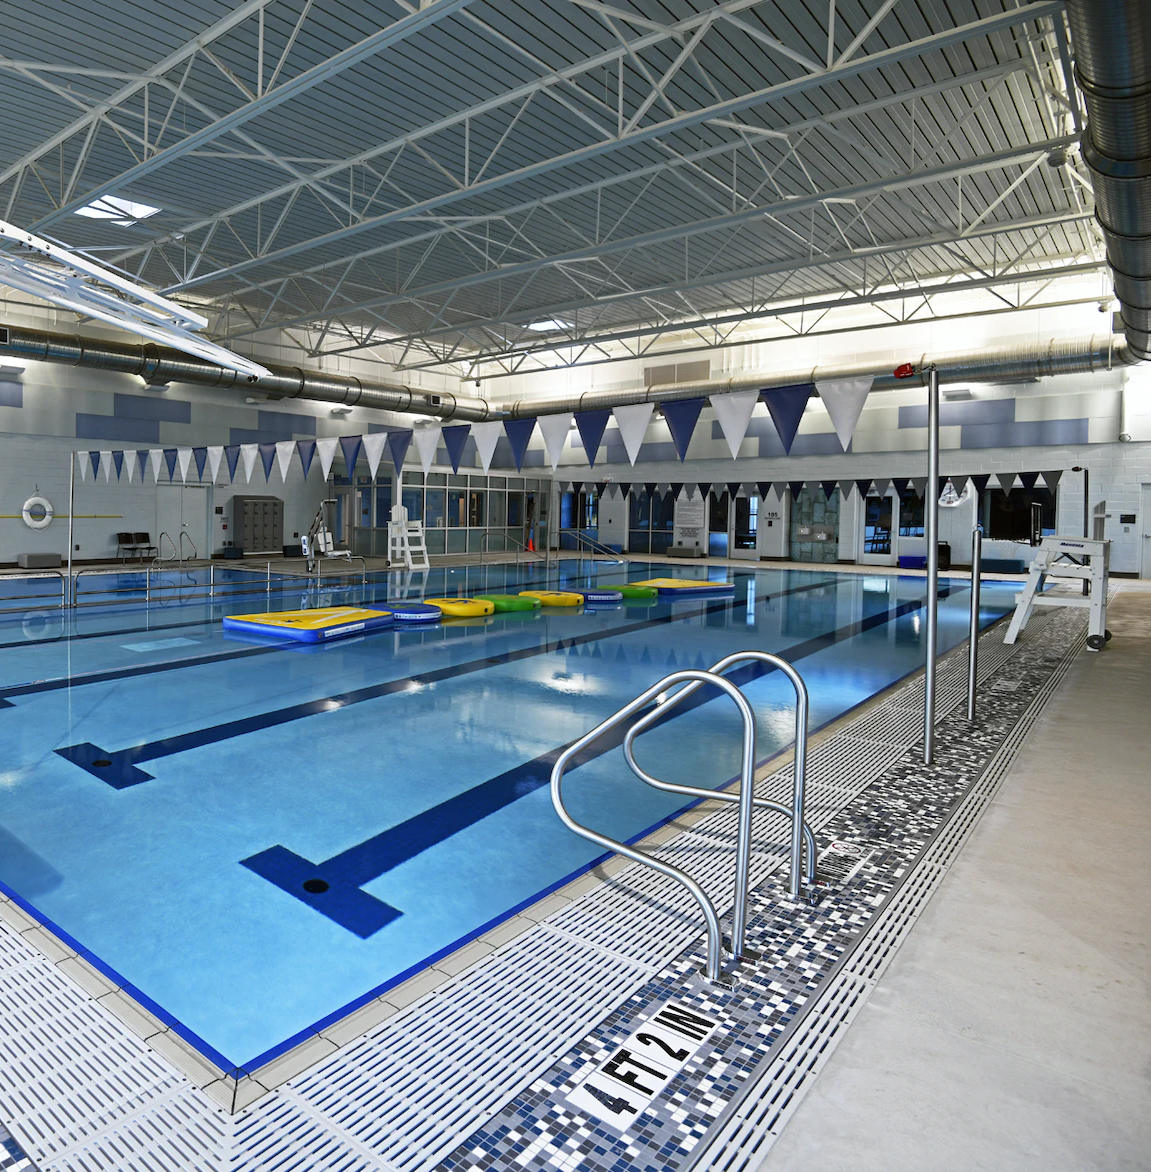 Indoor pool with Mendota Lifeguard chairs